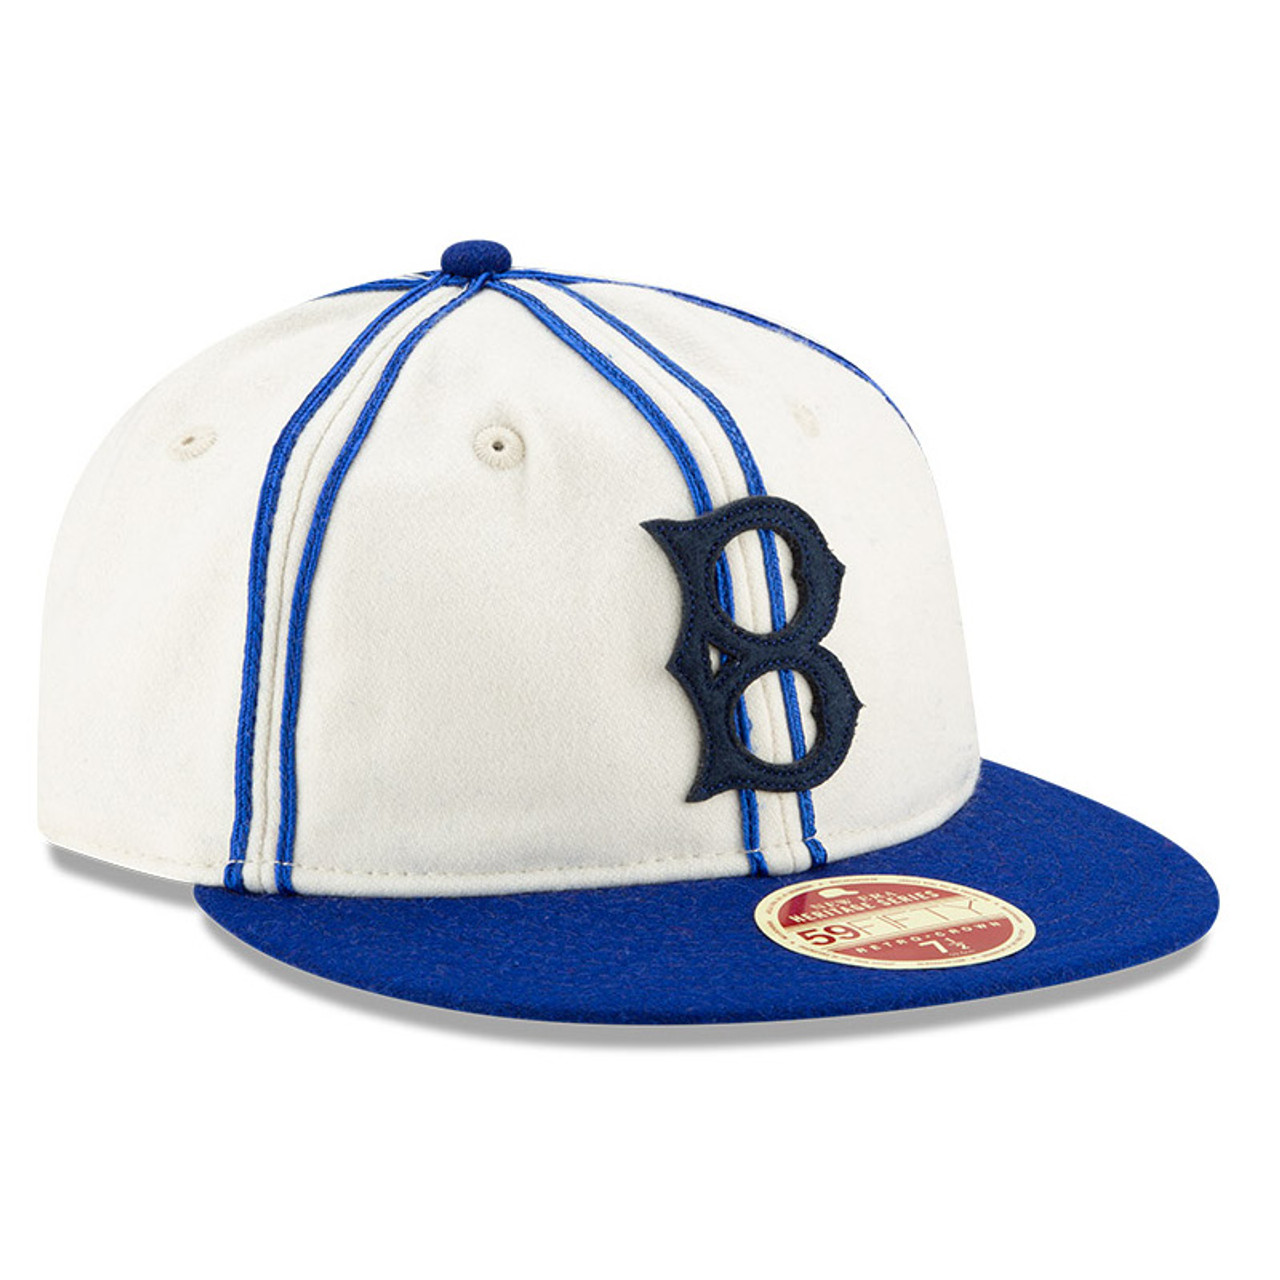 Official New Era LA Dodgers Cooperstown History Retro Crown 59FIFTY Cap  A11298_263